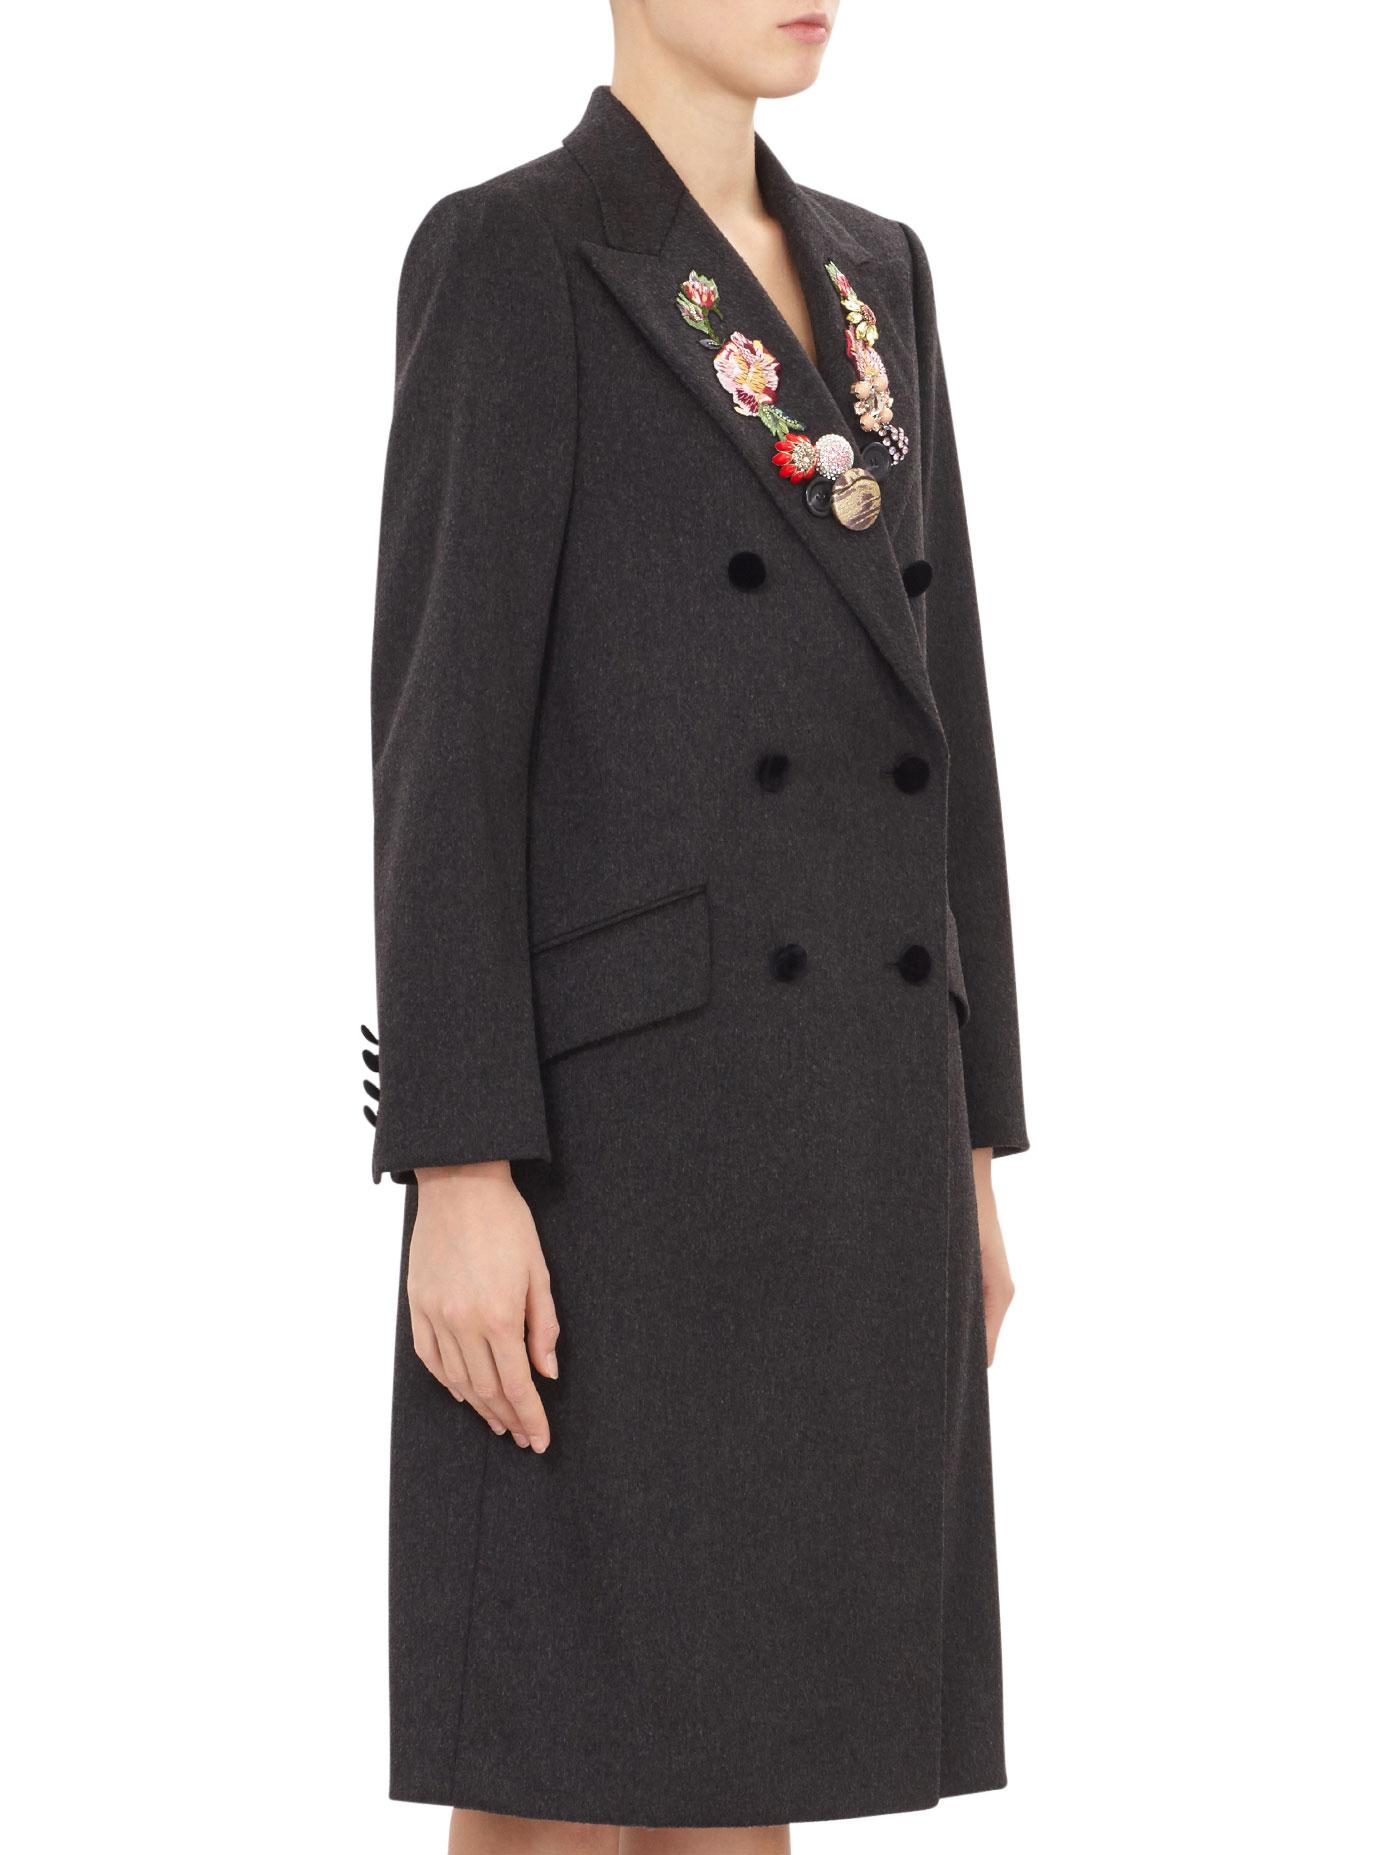 Lyst - Dolce & Gabbana Embellished Wool And Cashmere Coat in Gray